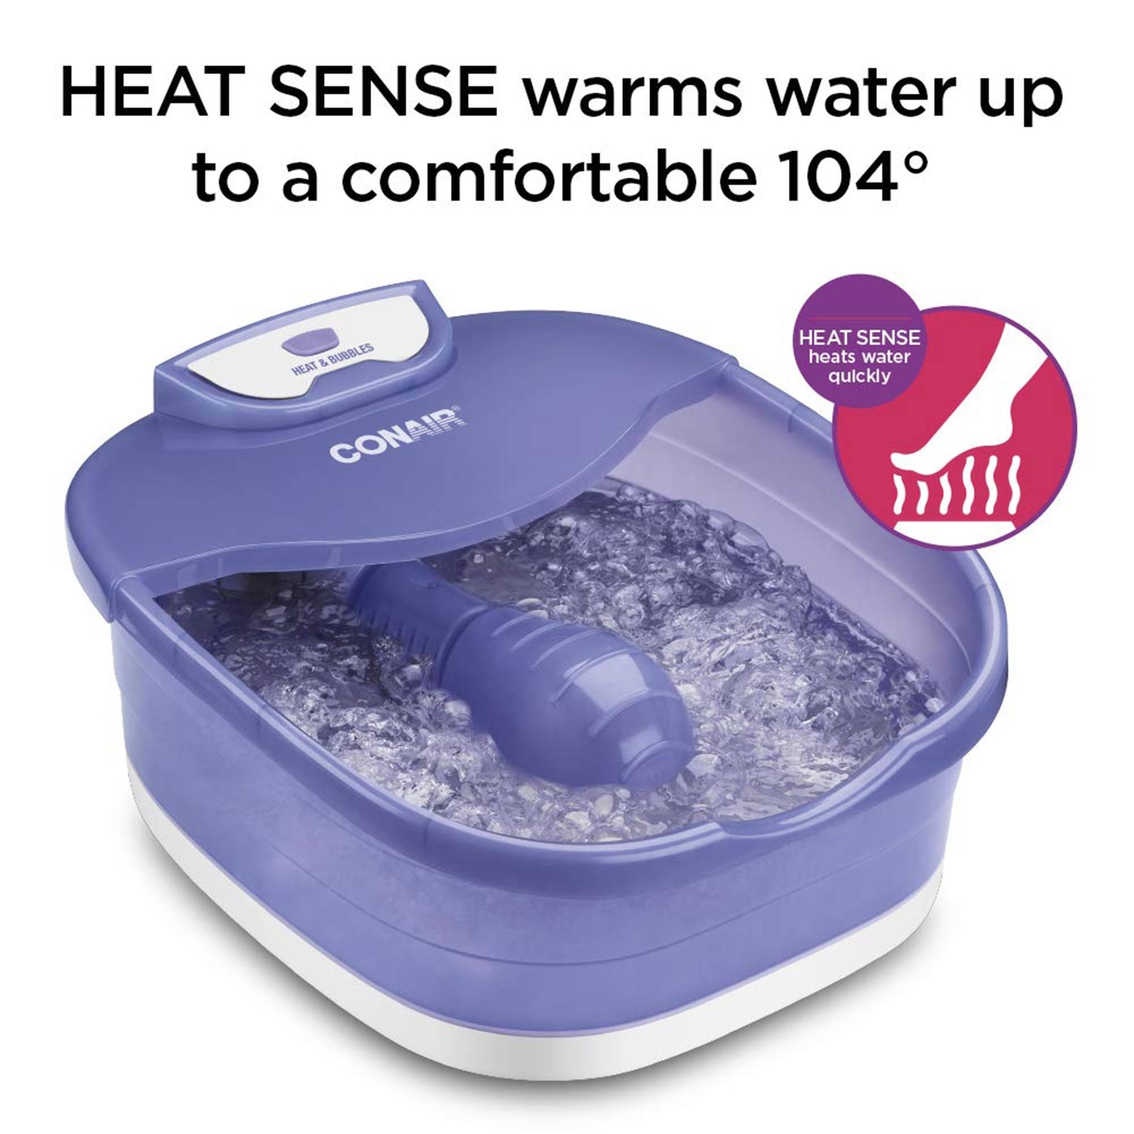 Conair Heat Sense Foot and Pedicure Spa with Heated Bubble Massage - Image 5 of 6